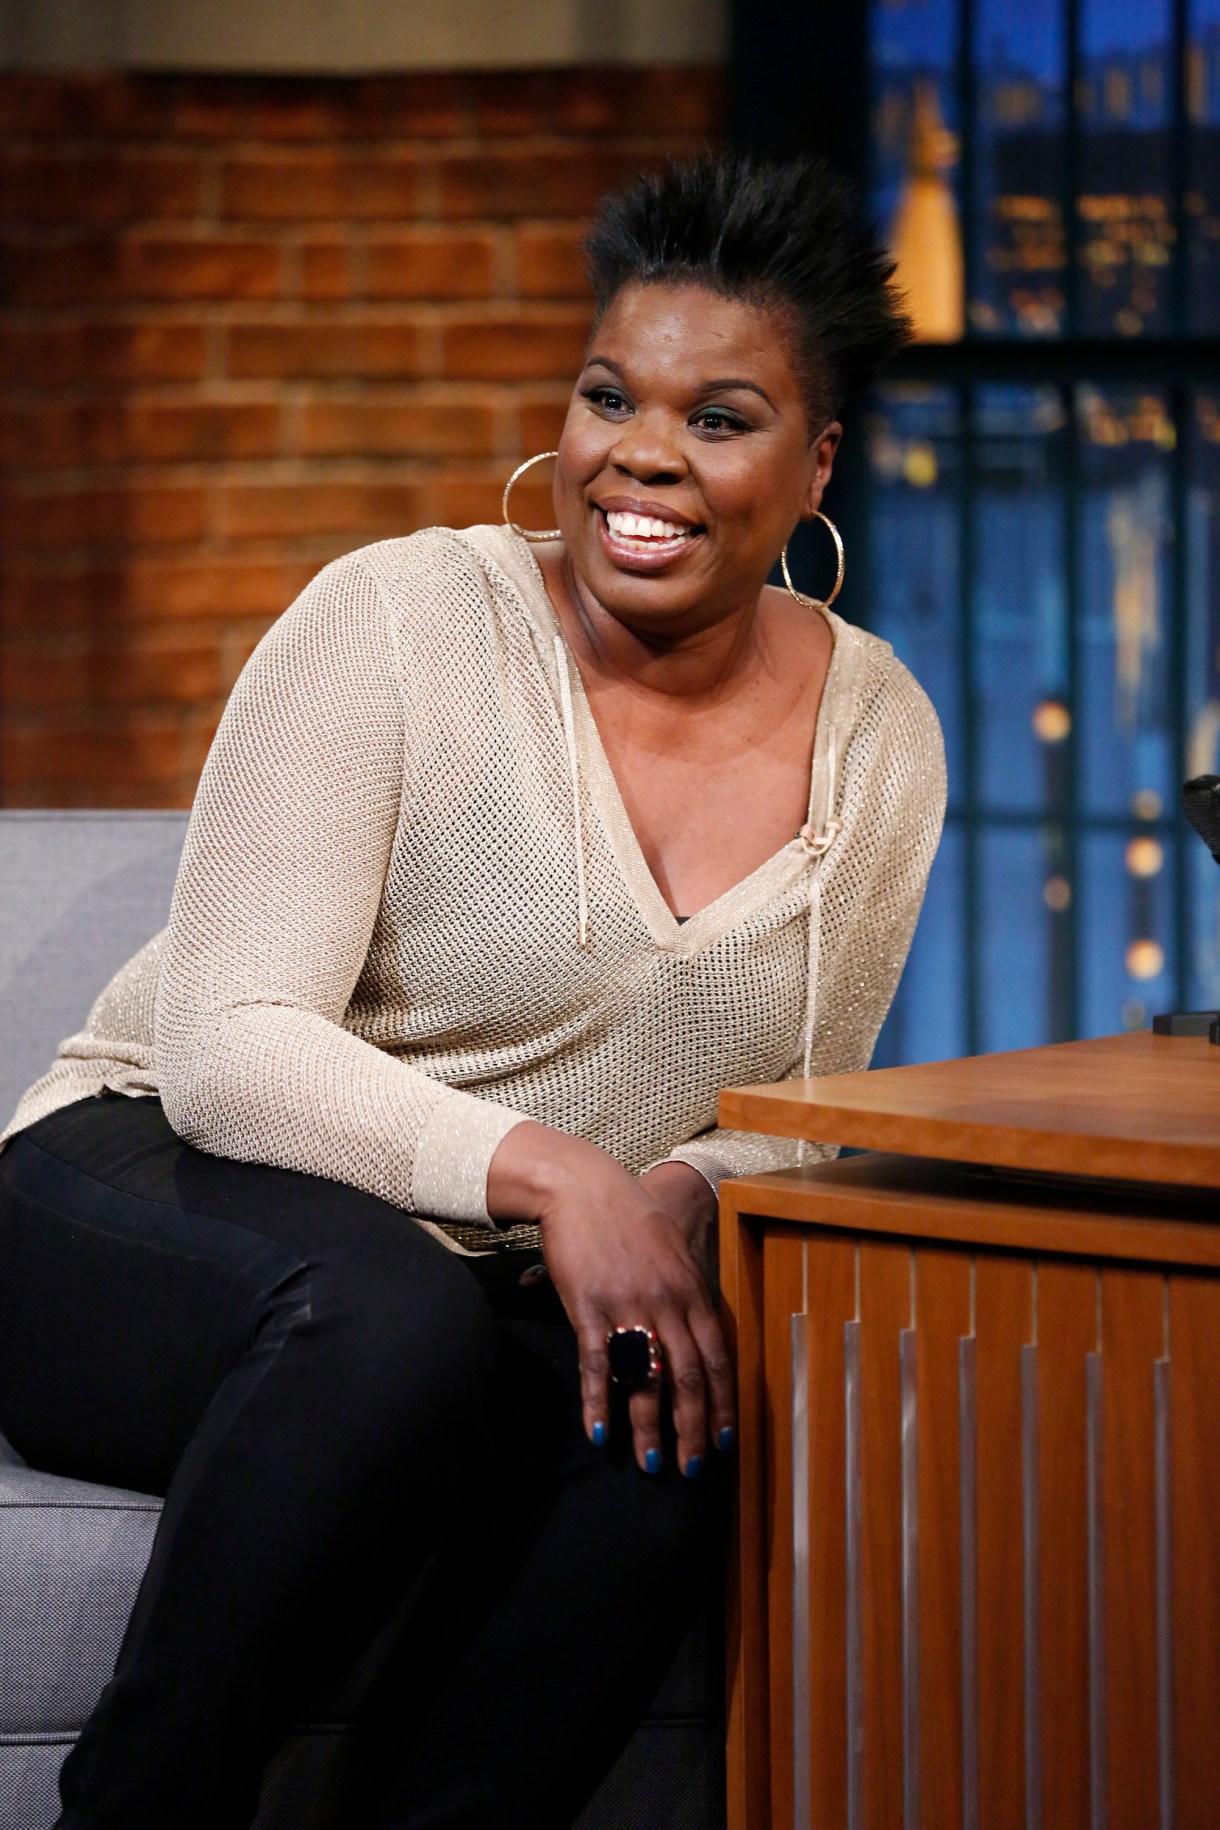 LATE NIGHT WITH SETH MEYERS -- Episode 205 -- Pictured: Leslie Jones, SNL cast member, during an interview on May 12, 2015 --